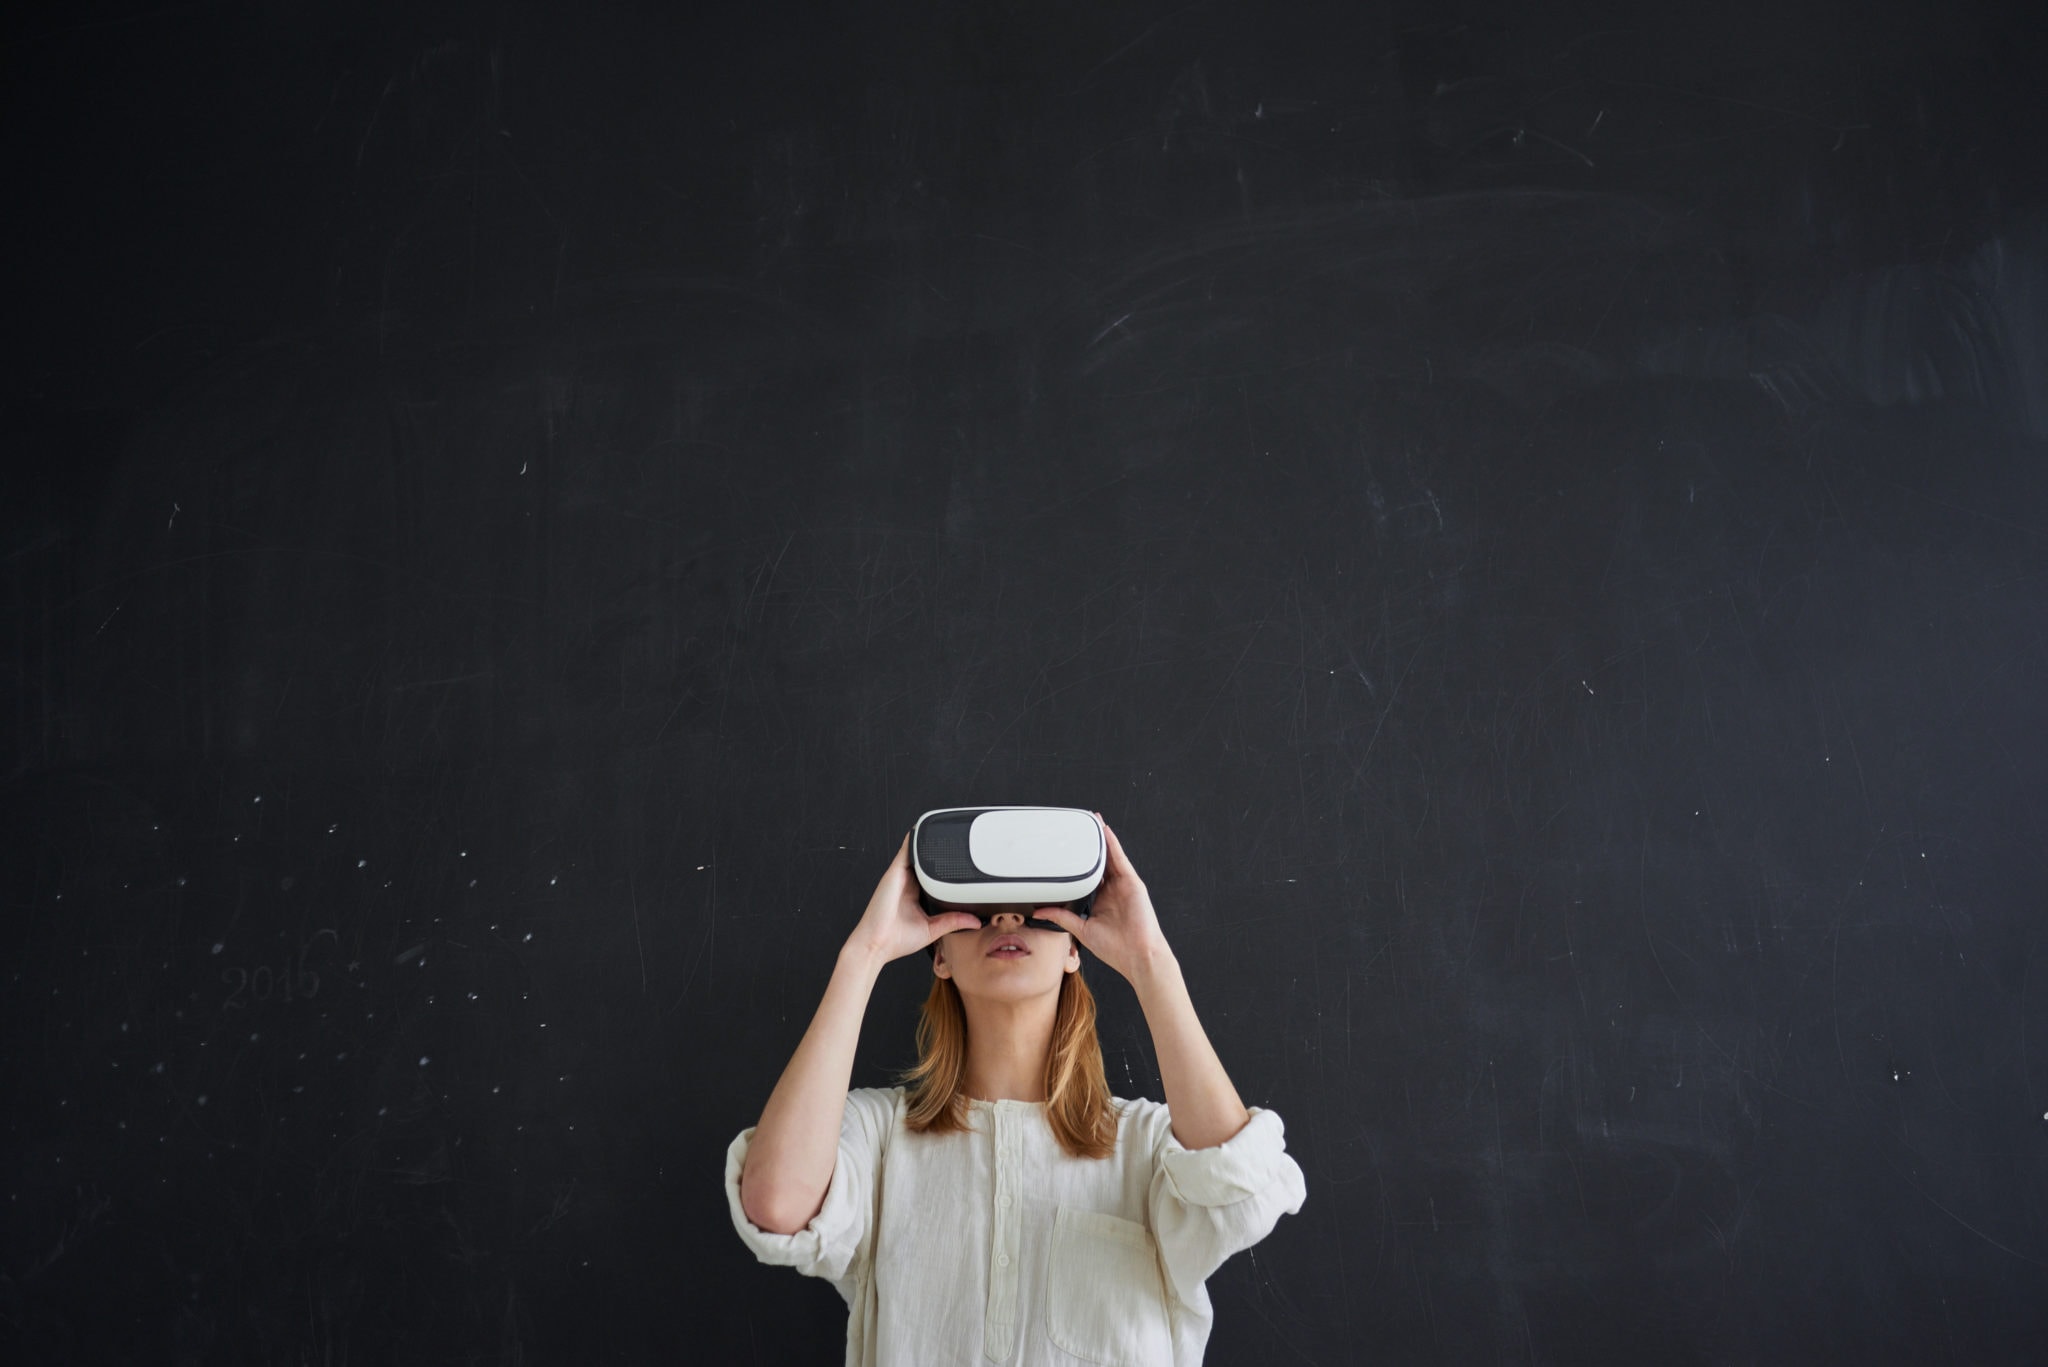 VR Headset Worn by Woman